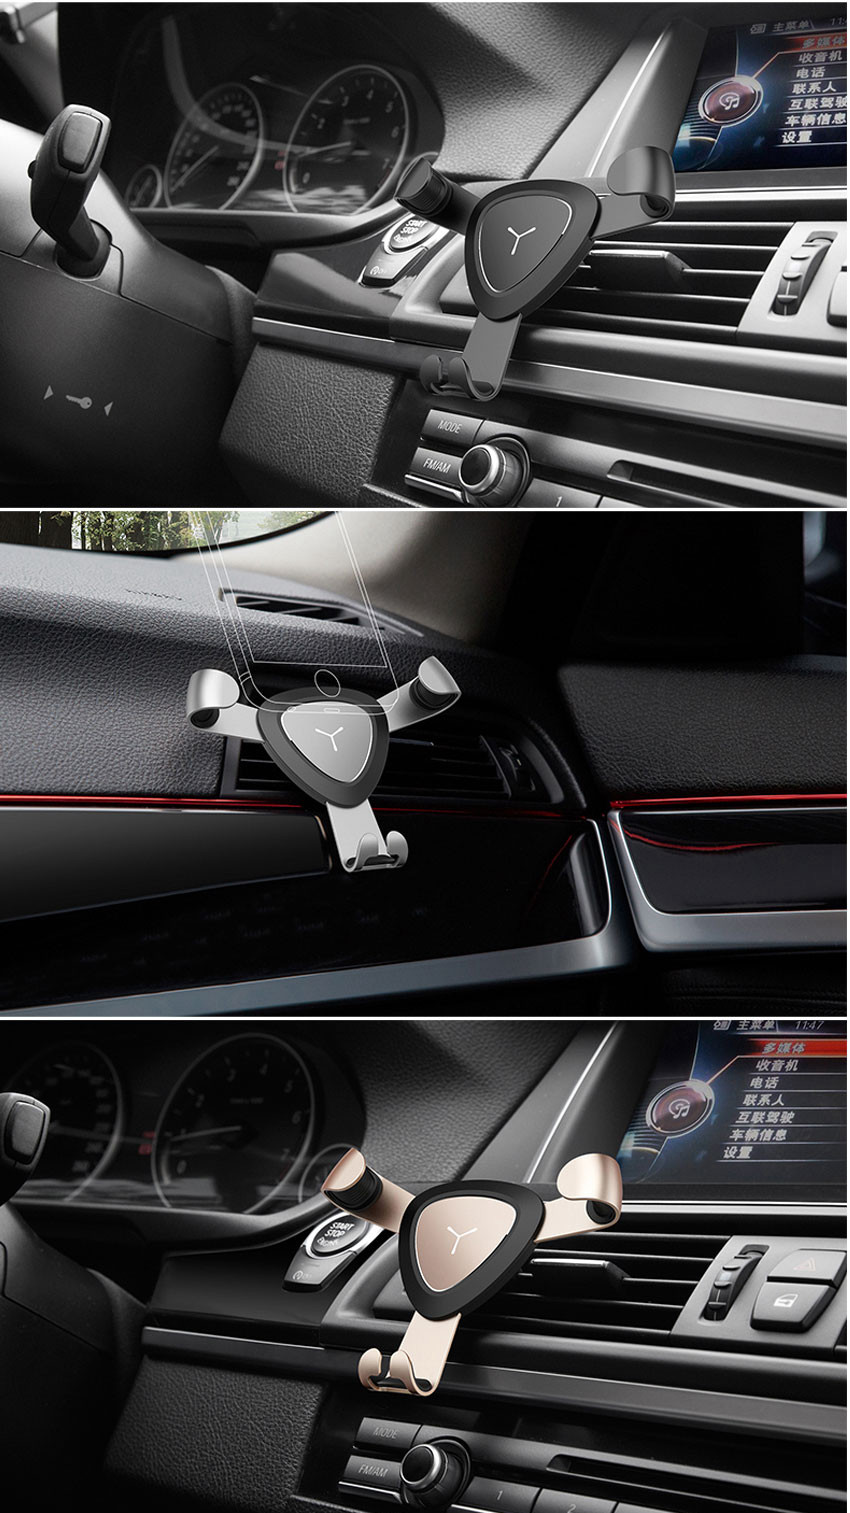 Bakeeytrade-Gravity-Linkage-Auto-Lock-Metal-Car-Air-Vent-Phone-Holder-Stand-for-Xiaomi-Mobile-Phone-1203097-10